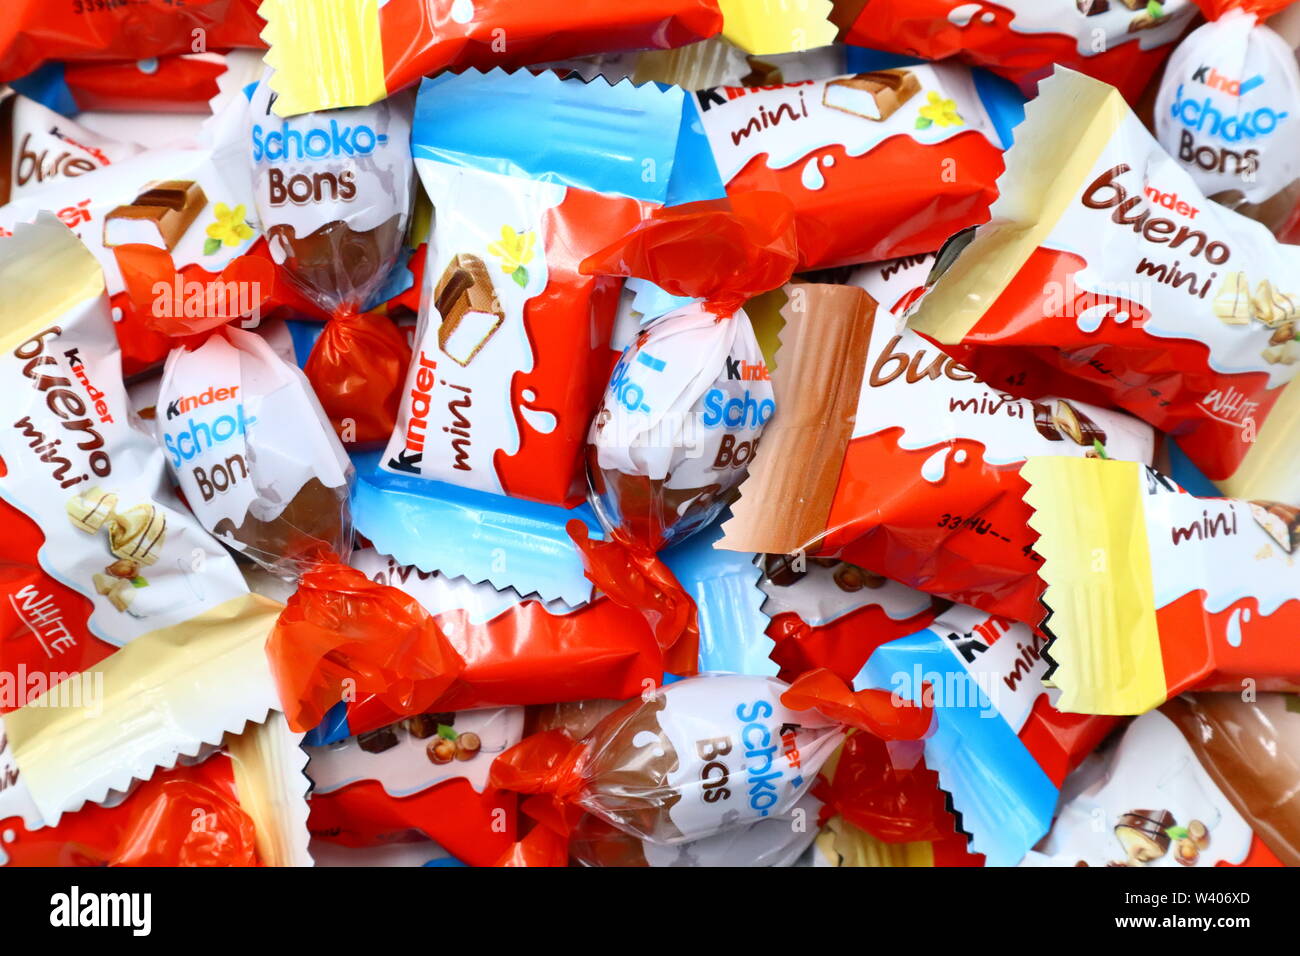 https://c8.alamy.com/comp/W406XD/kinder-ferrero-chocolates-kinder-is-a-brand-of-products-made-in-italy-by-ferrero-W406XD.jpg